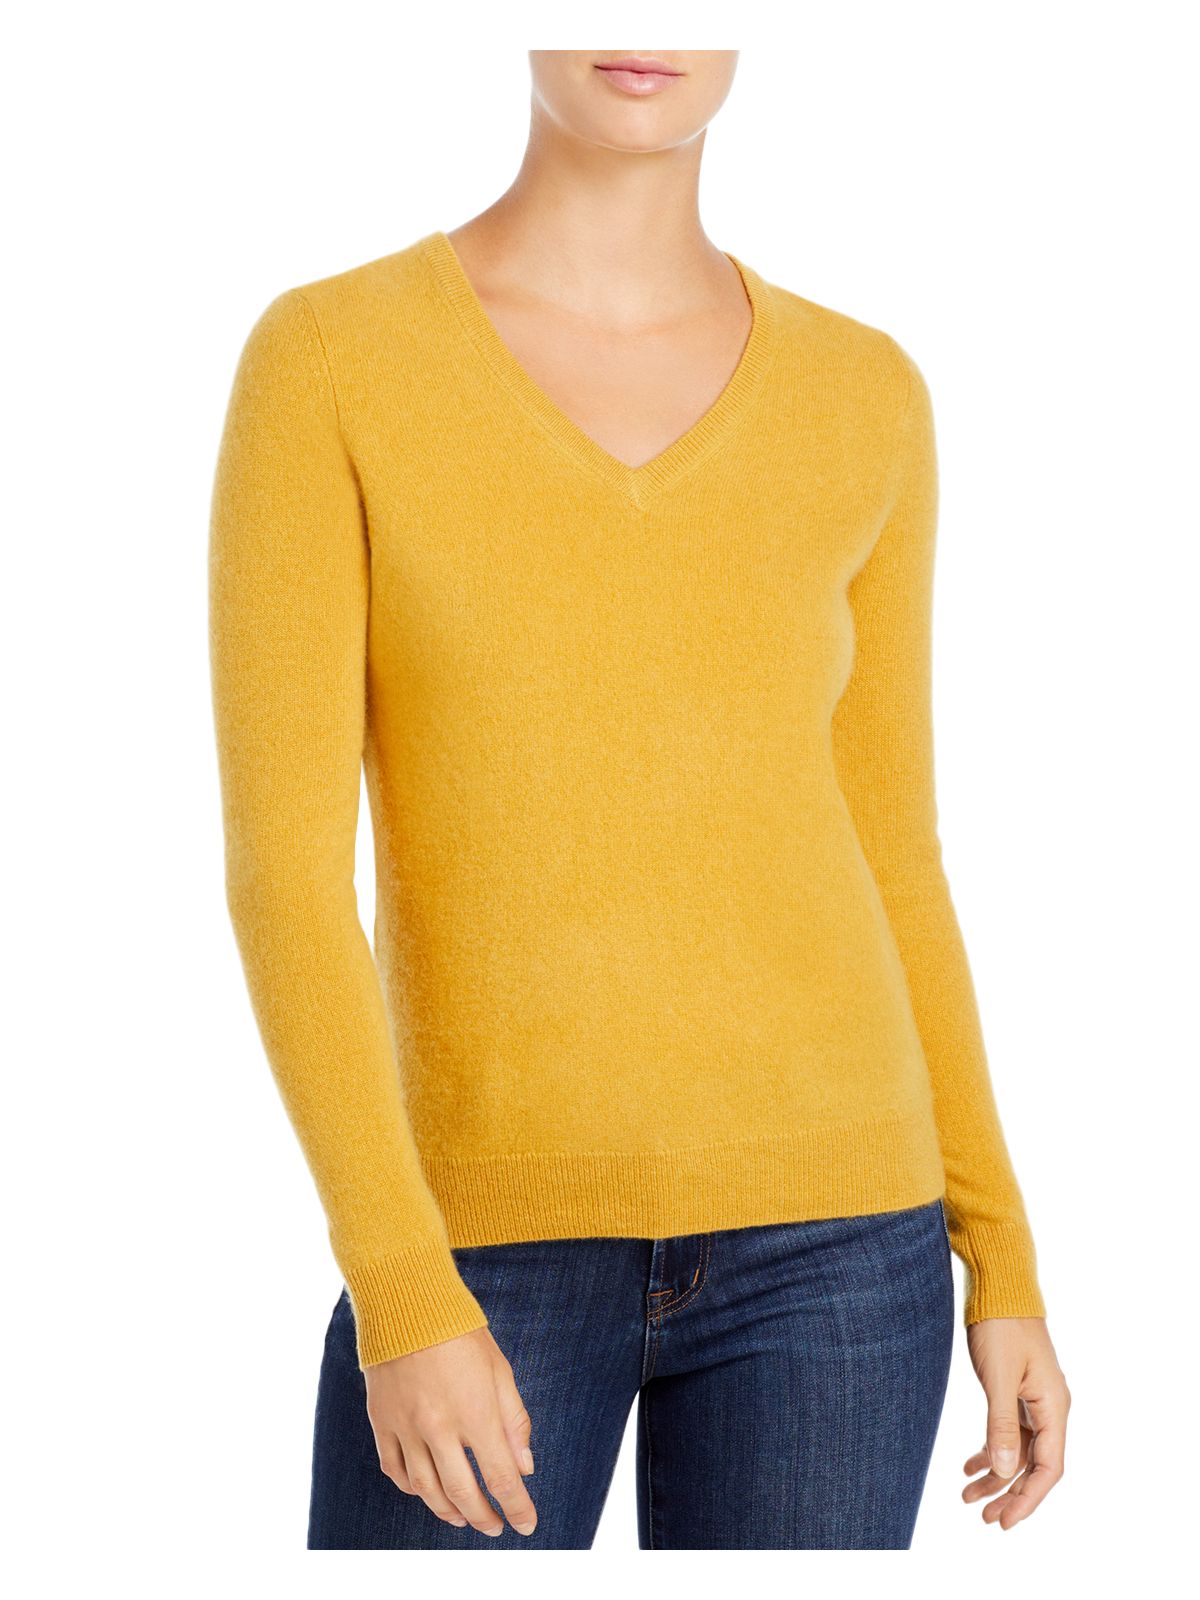 C Womens Yellow Cashmere Long Sleeve V Neck Wear To Work Sweater XL